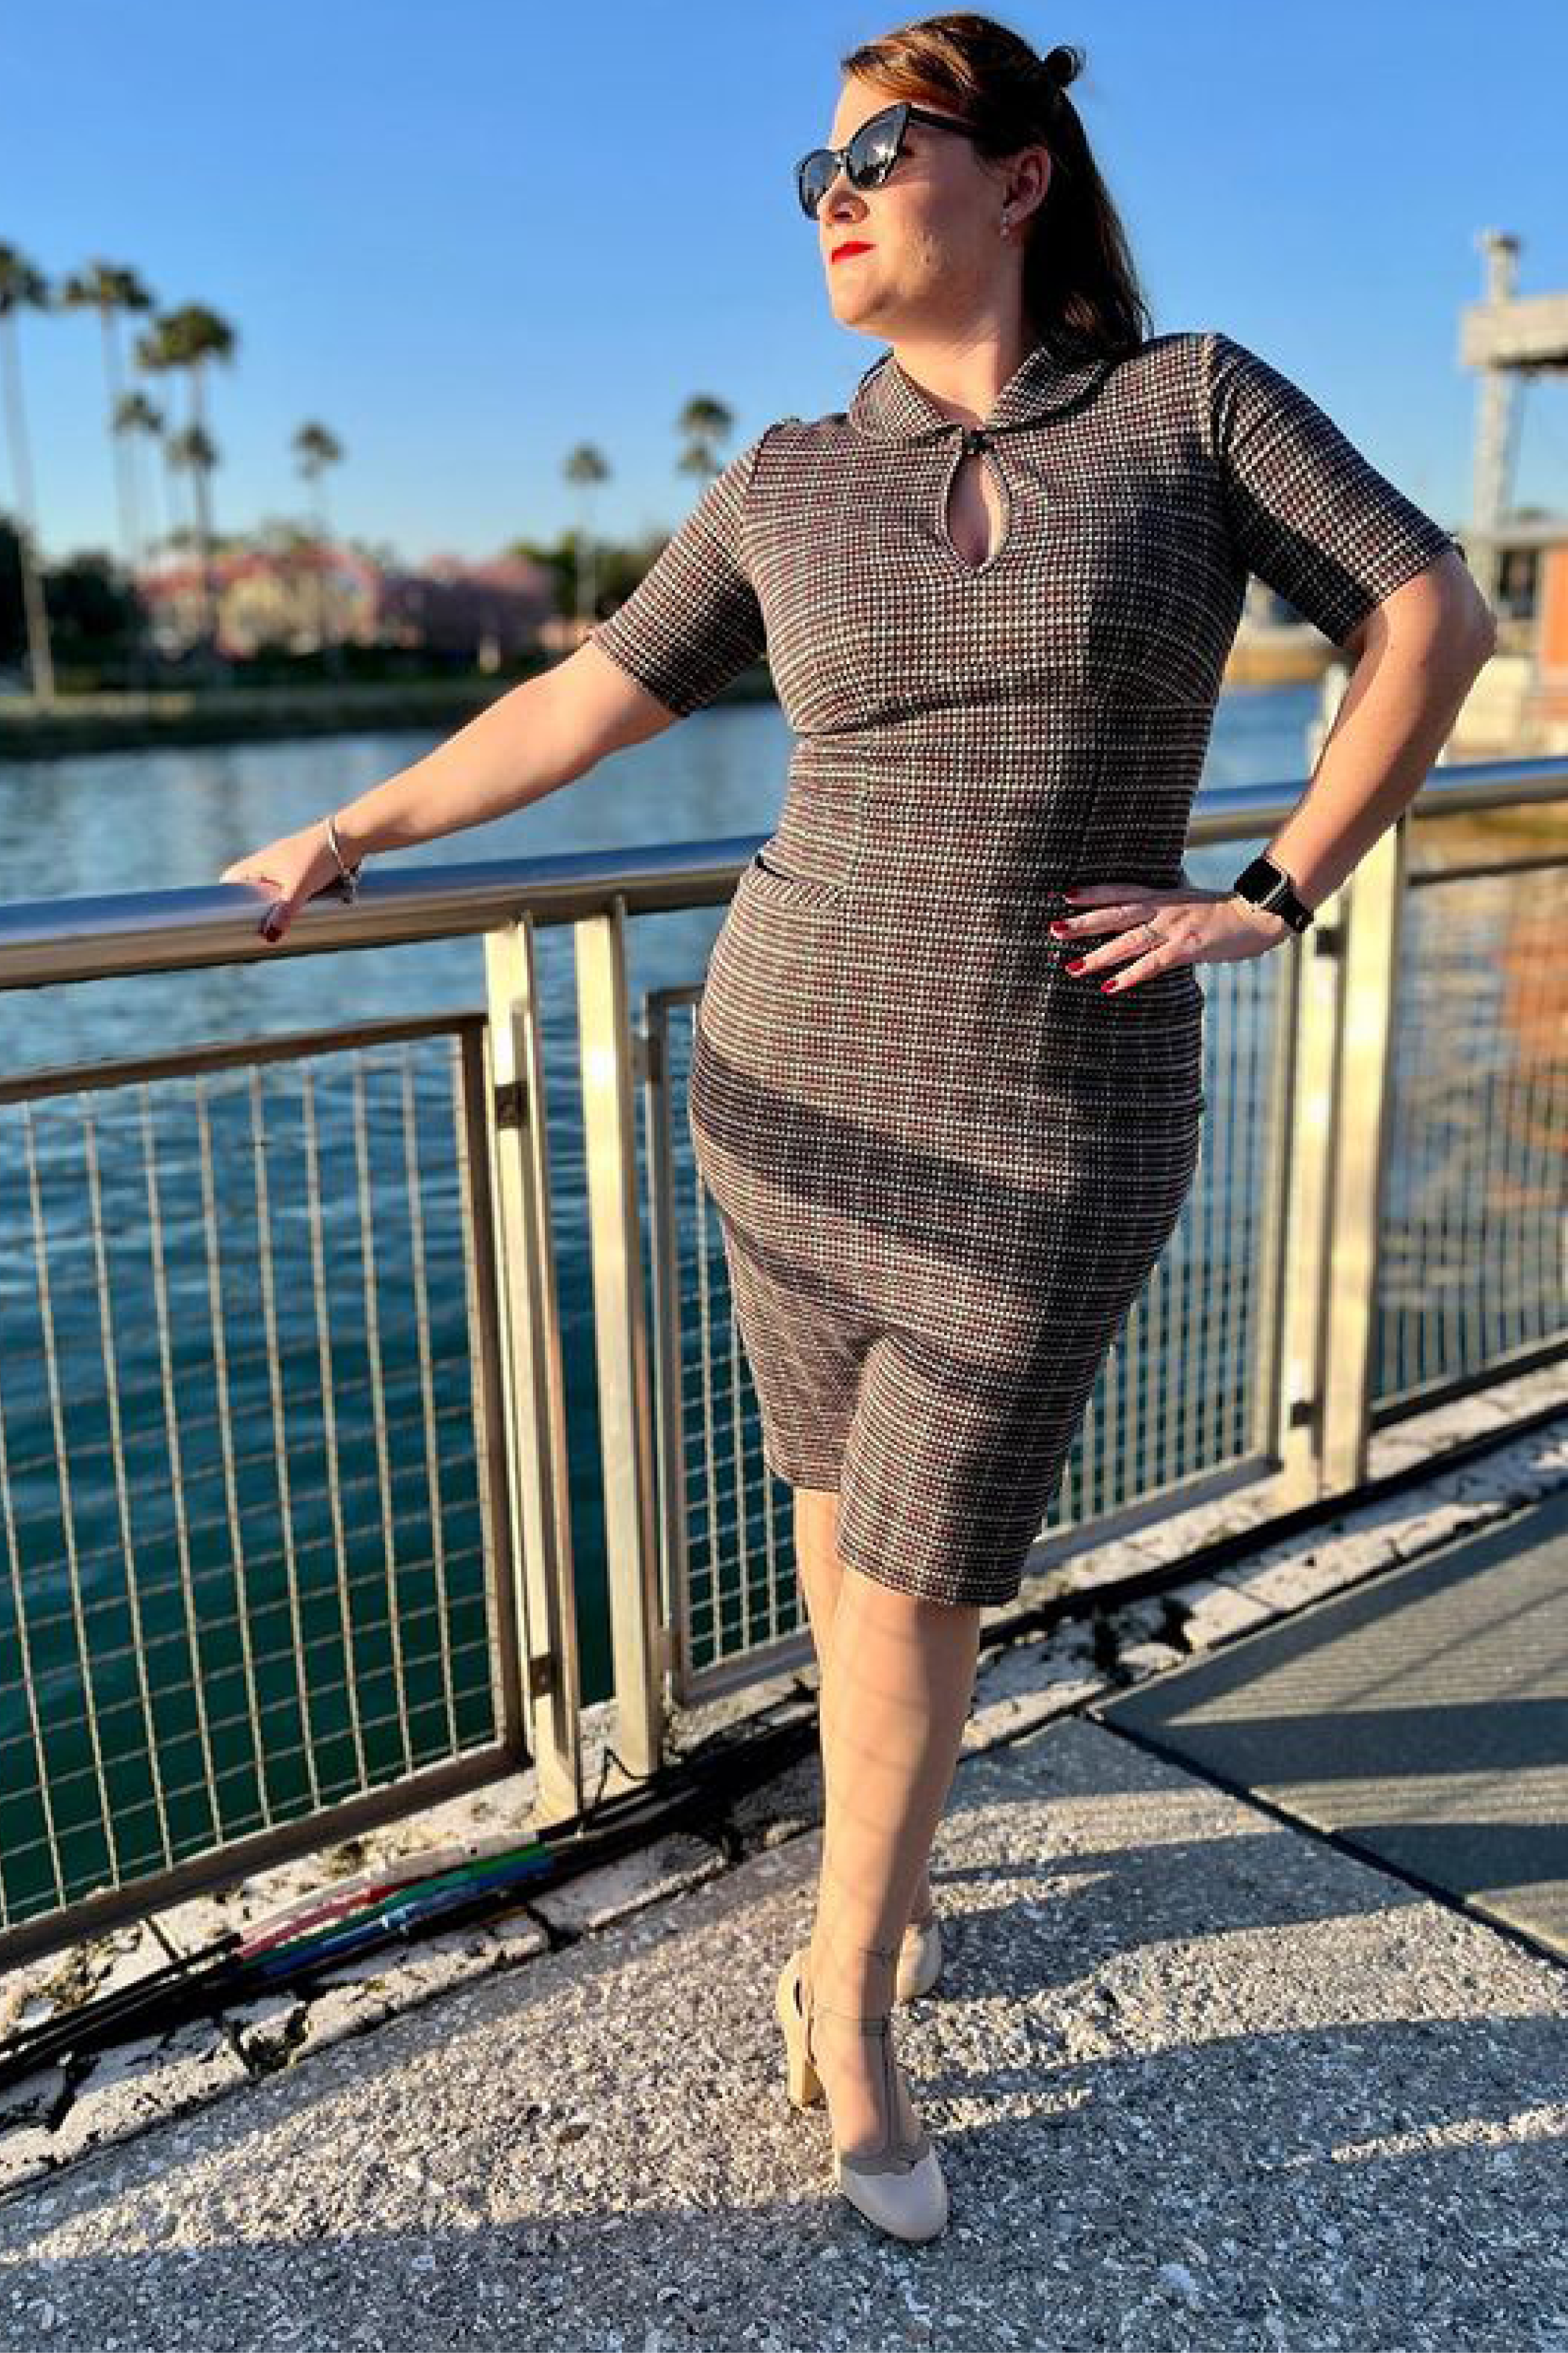 Audrey Pencil in Navy Houndstooth